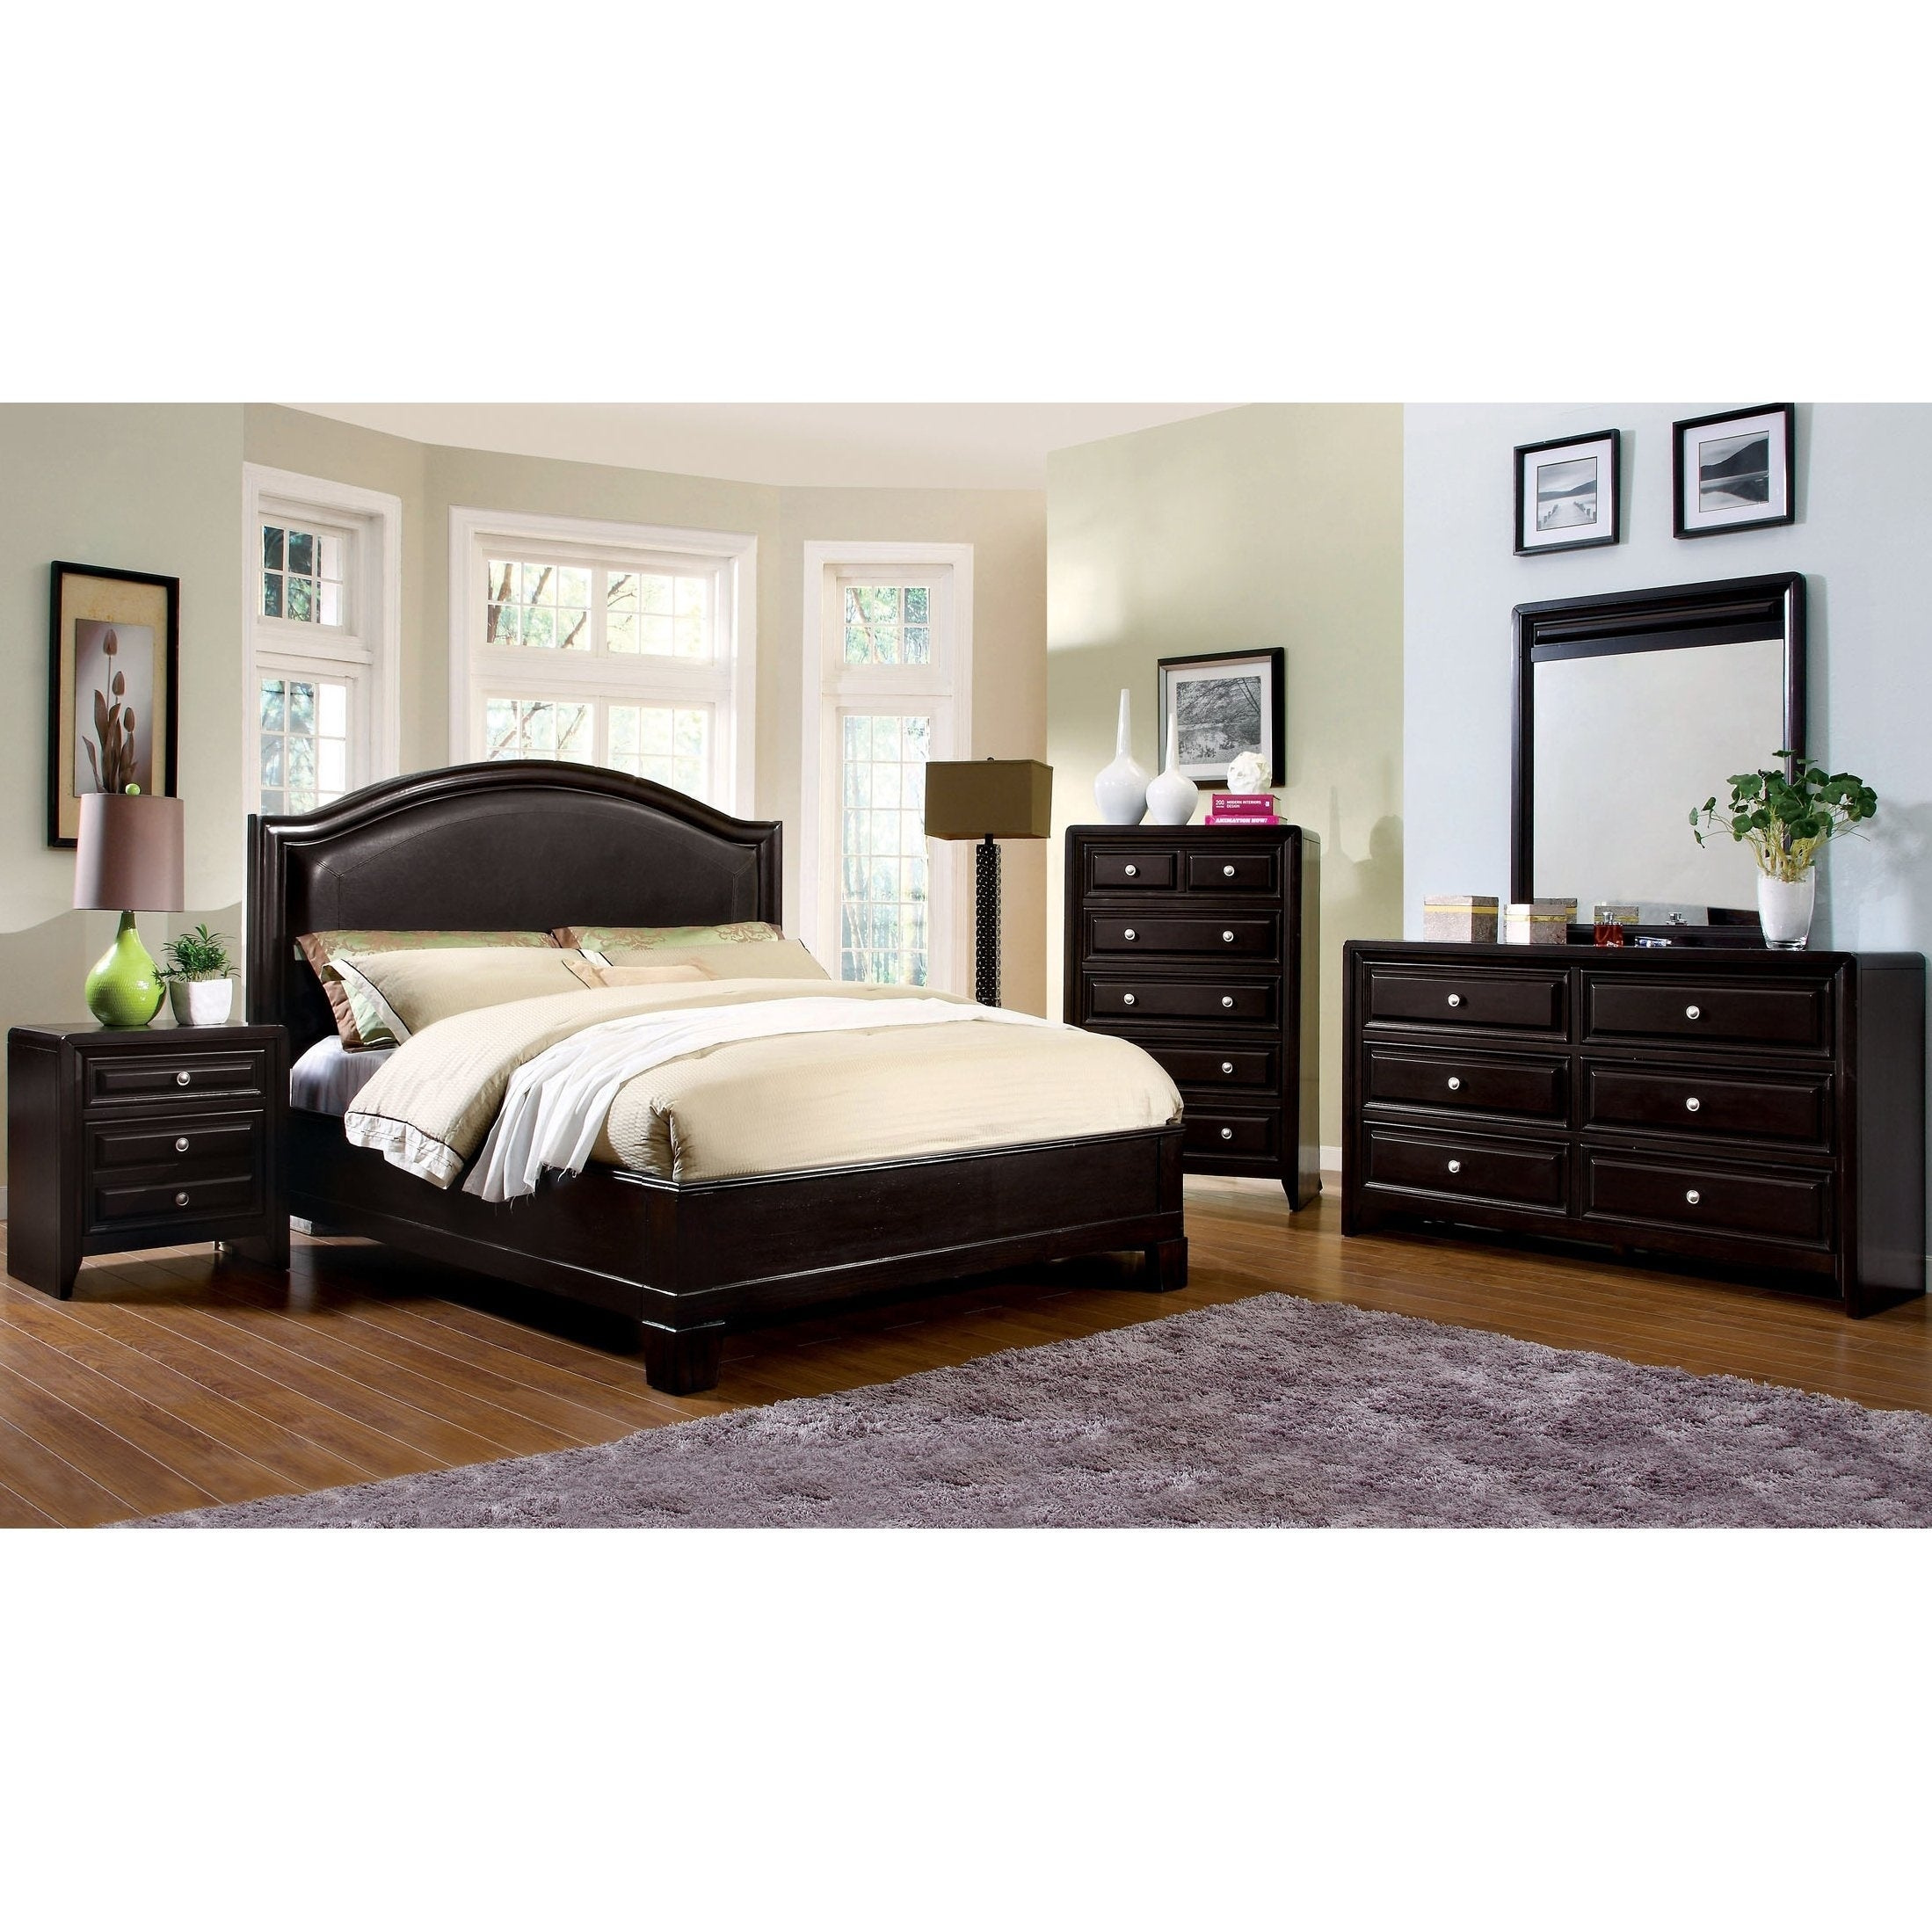 Transitional Espresso 4 Piece Bedroom Set intended for size 2198 X 2198